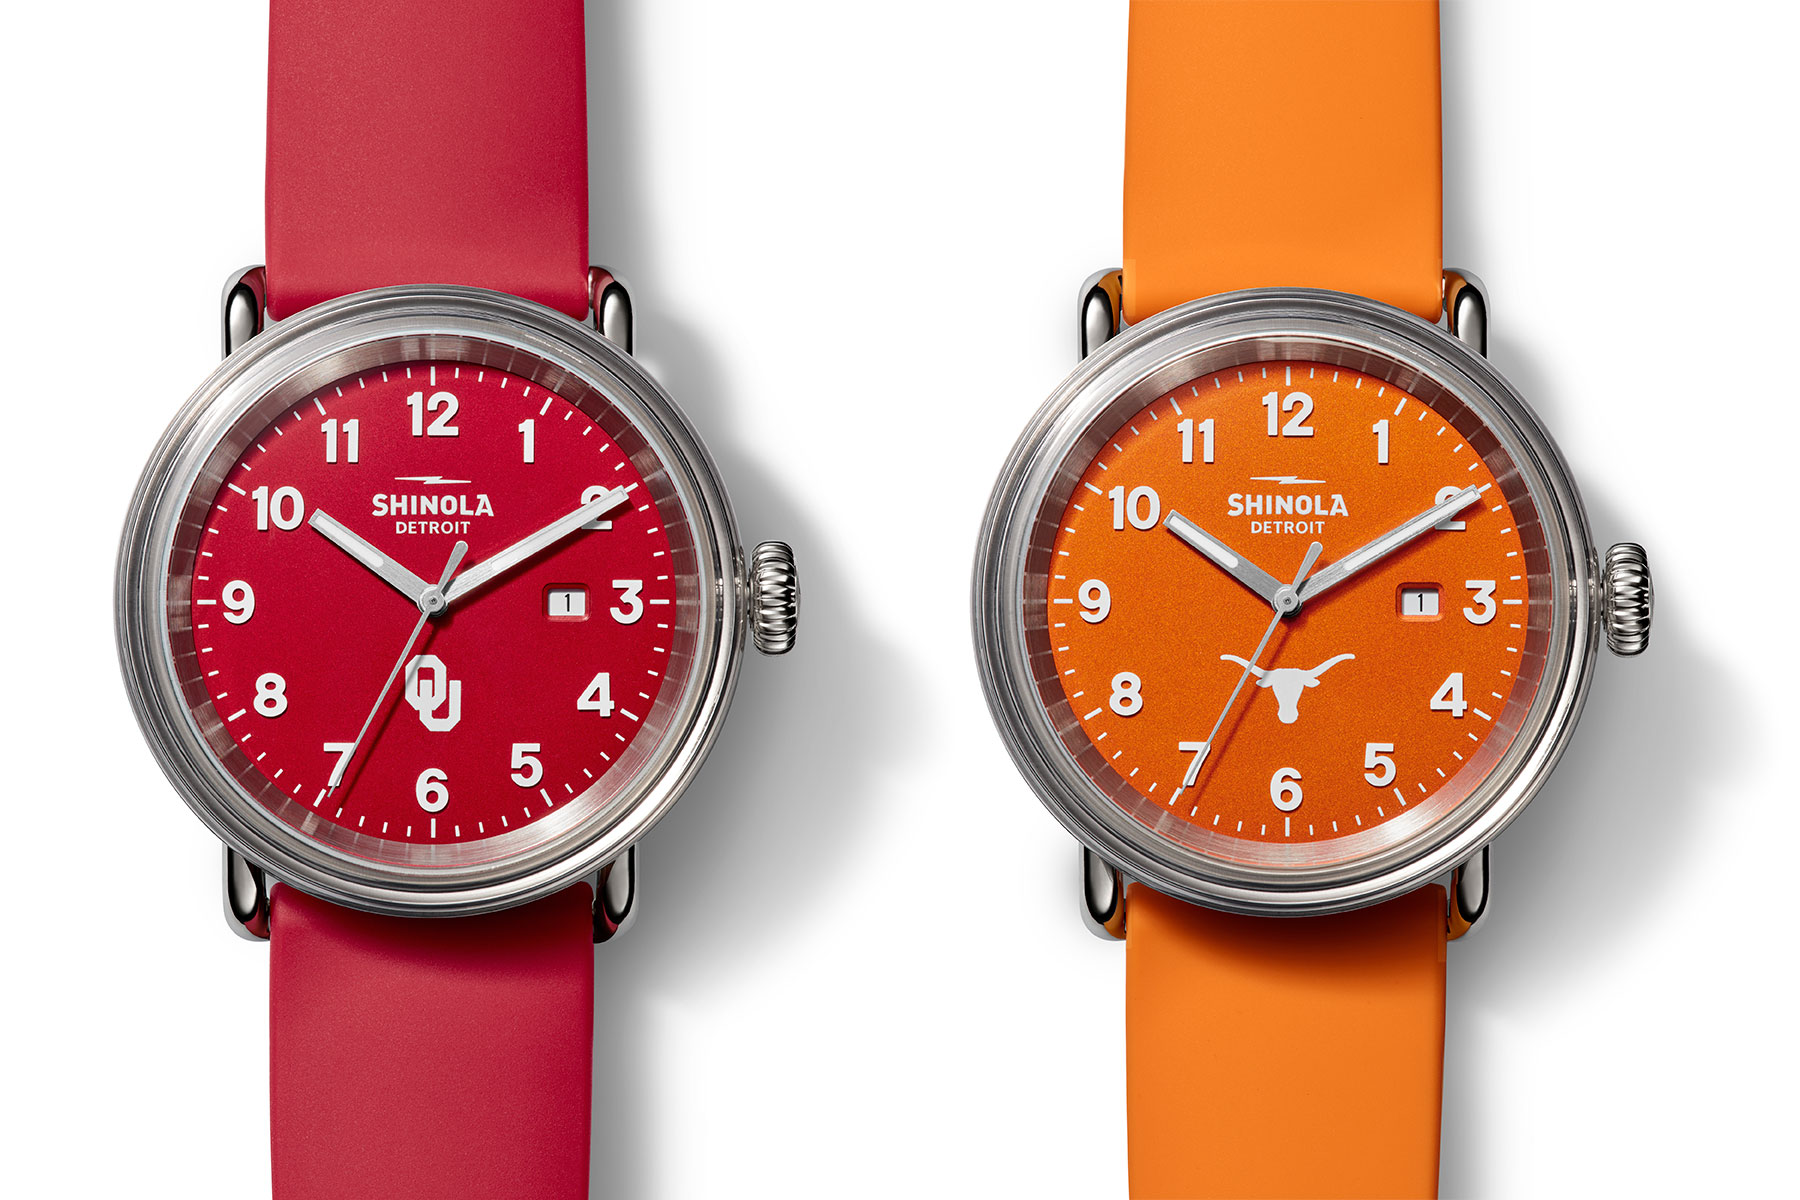 Shinola's limited-edition TX/OU collection, sold at Neiman Marcus